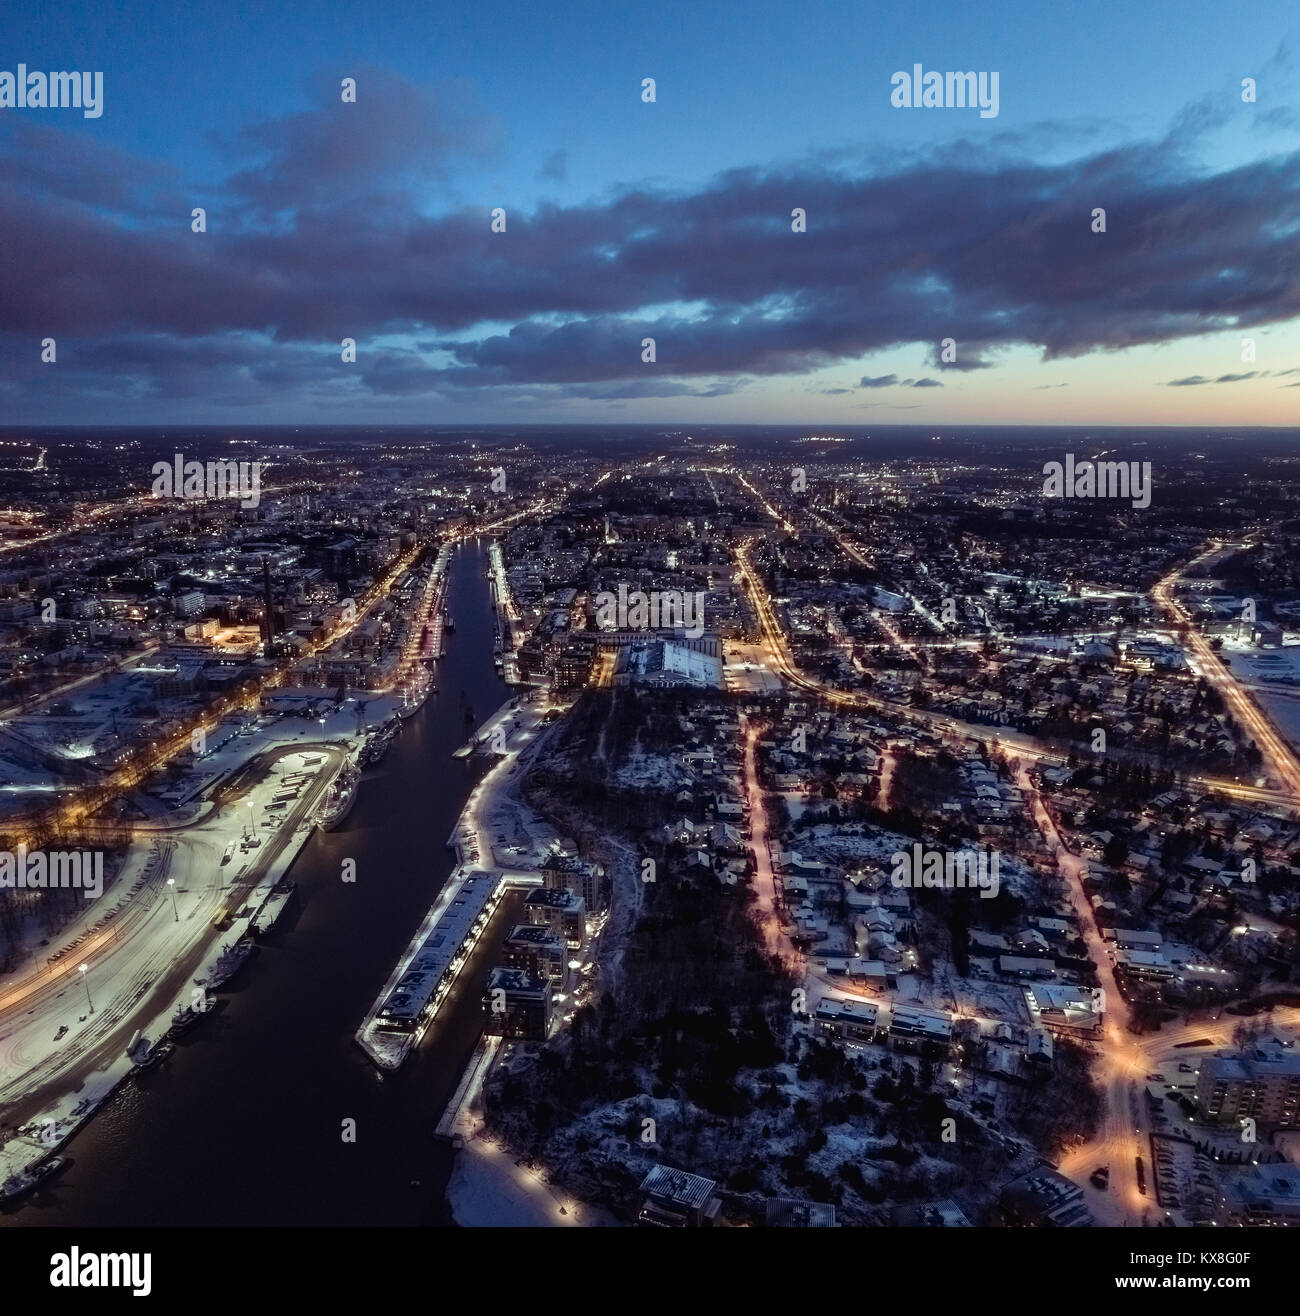 Aerial view of the  town of Turku at morning illuminated by street lights Stock Photo